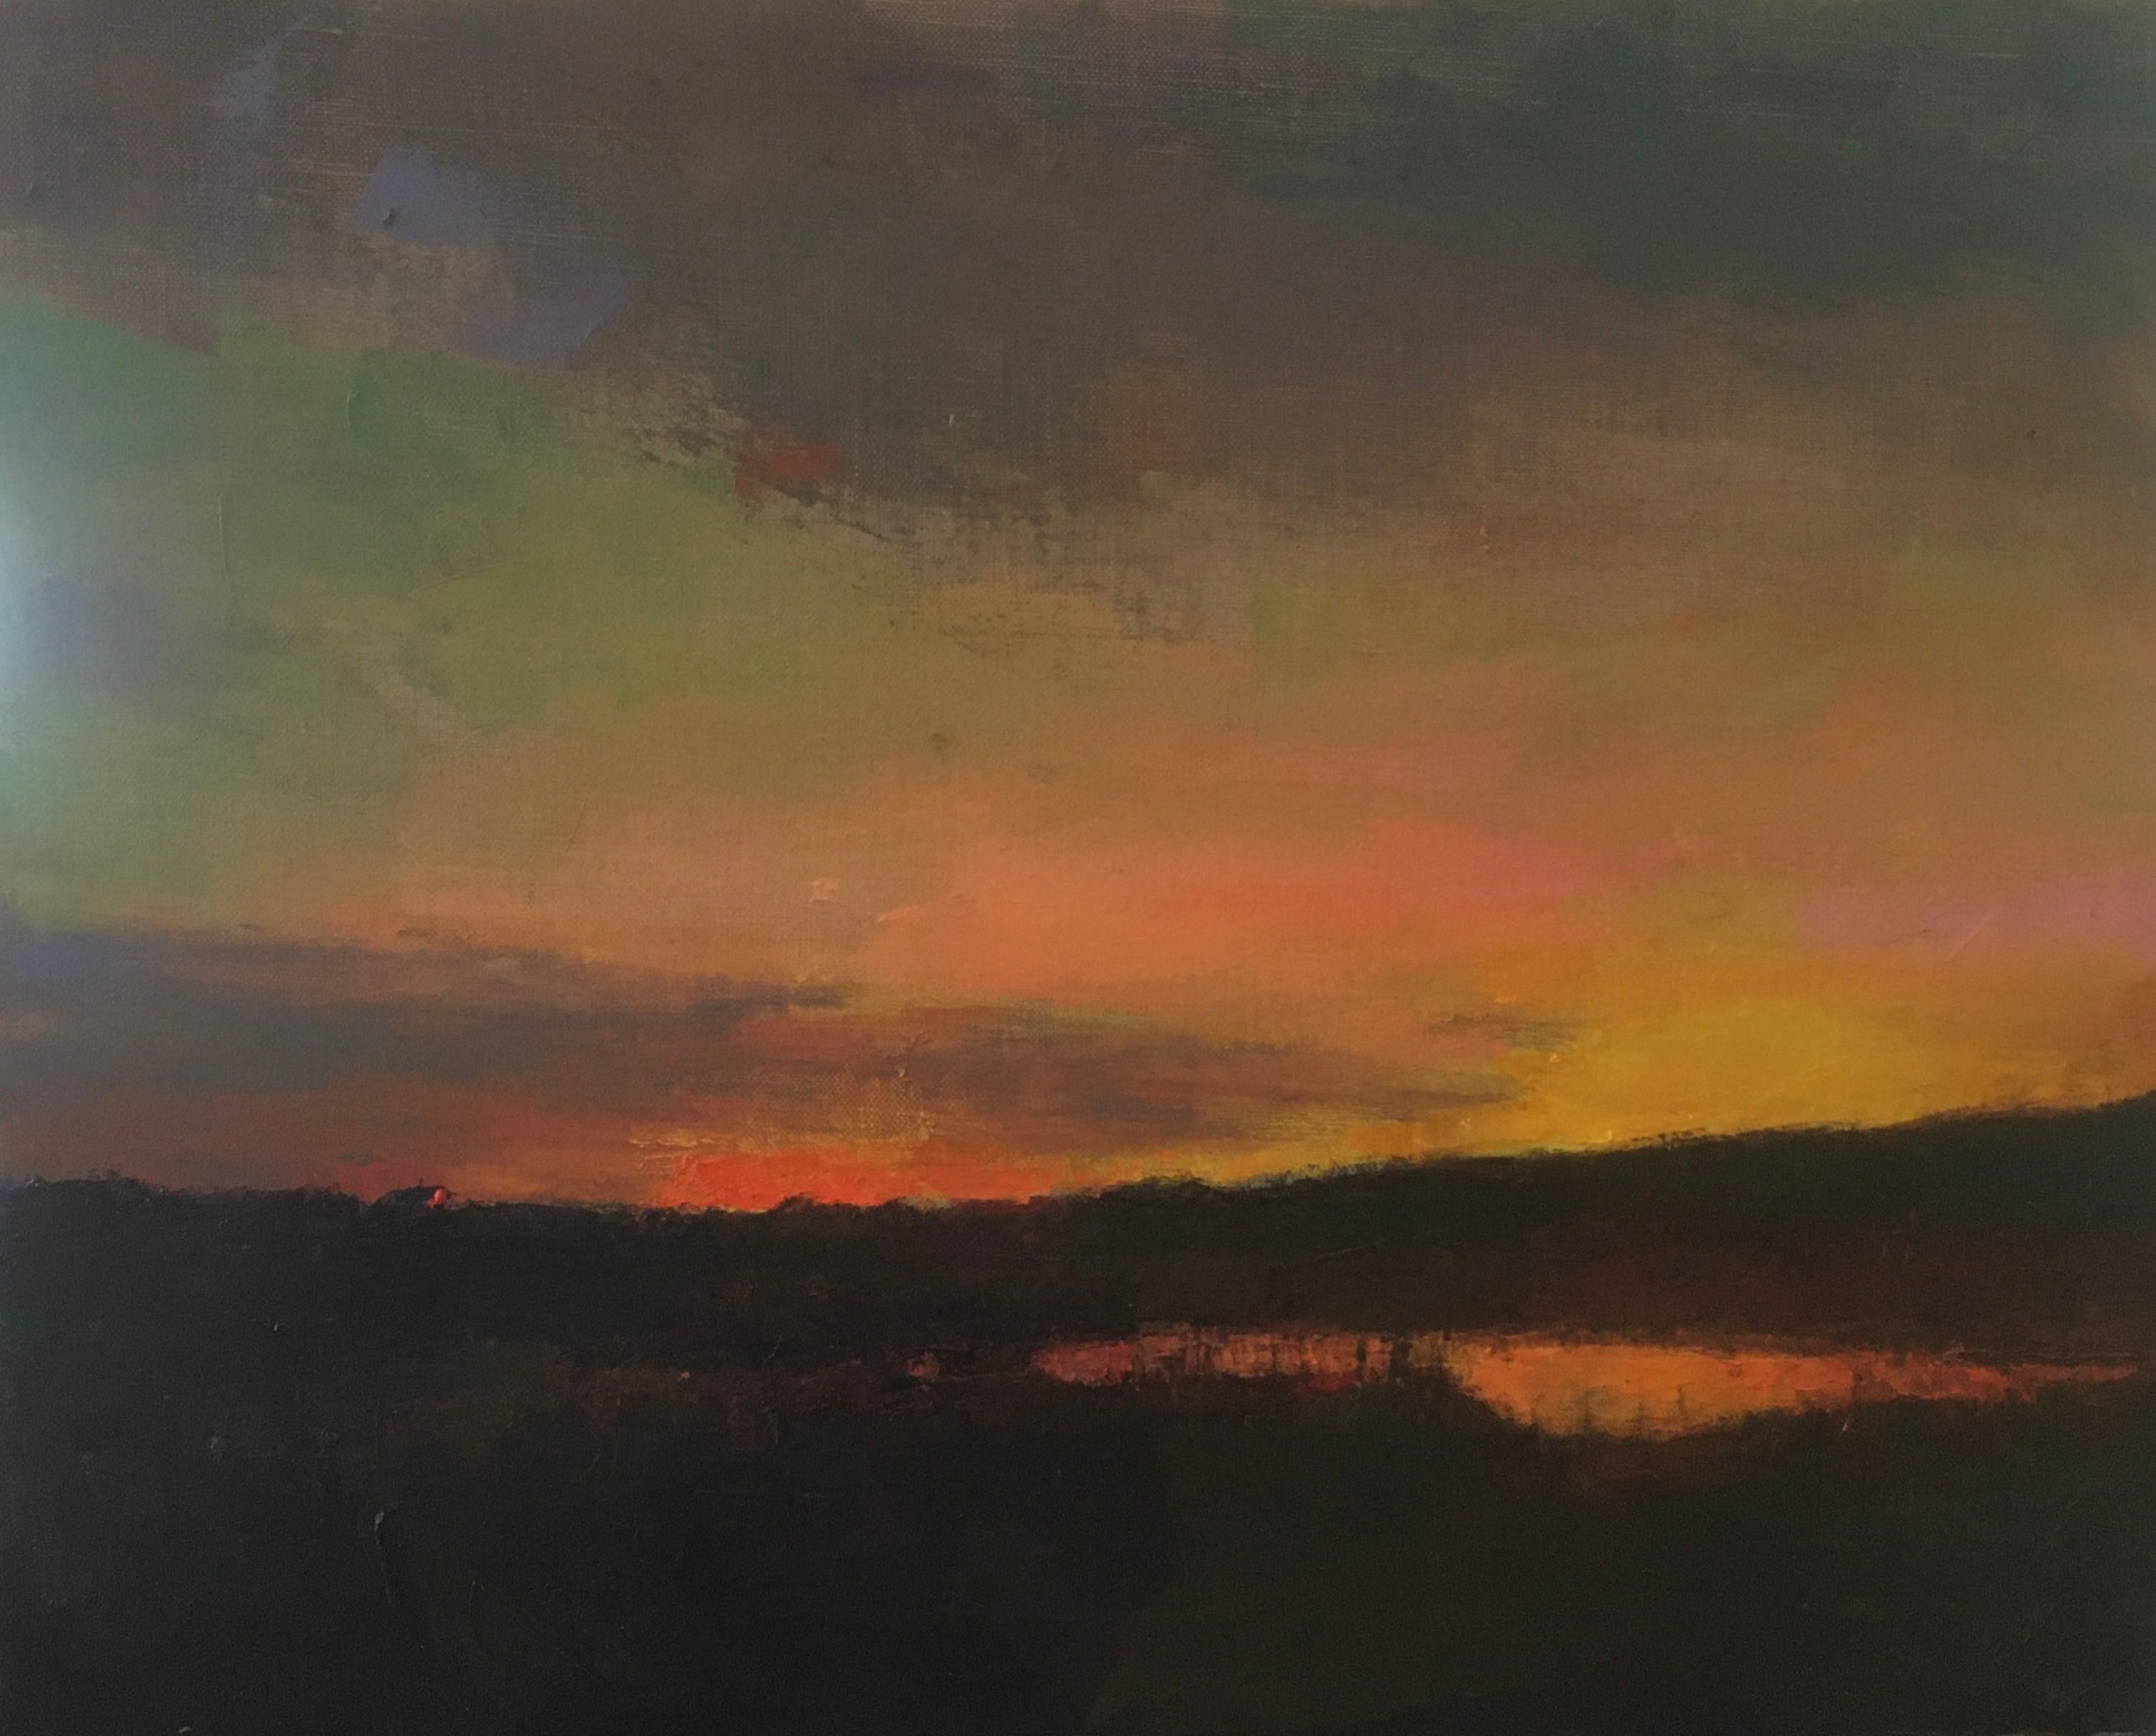 Larry Horowitz Landscape Painting - "Looking West" oil painting of an orange sunset over dark grasses